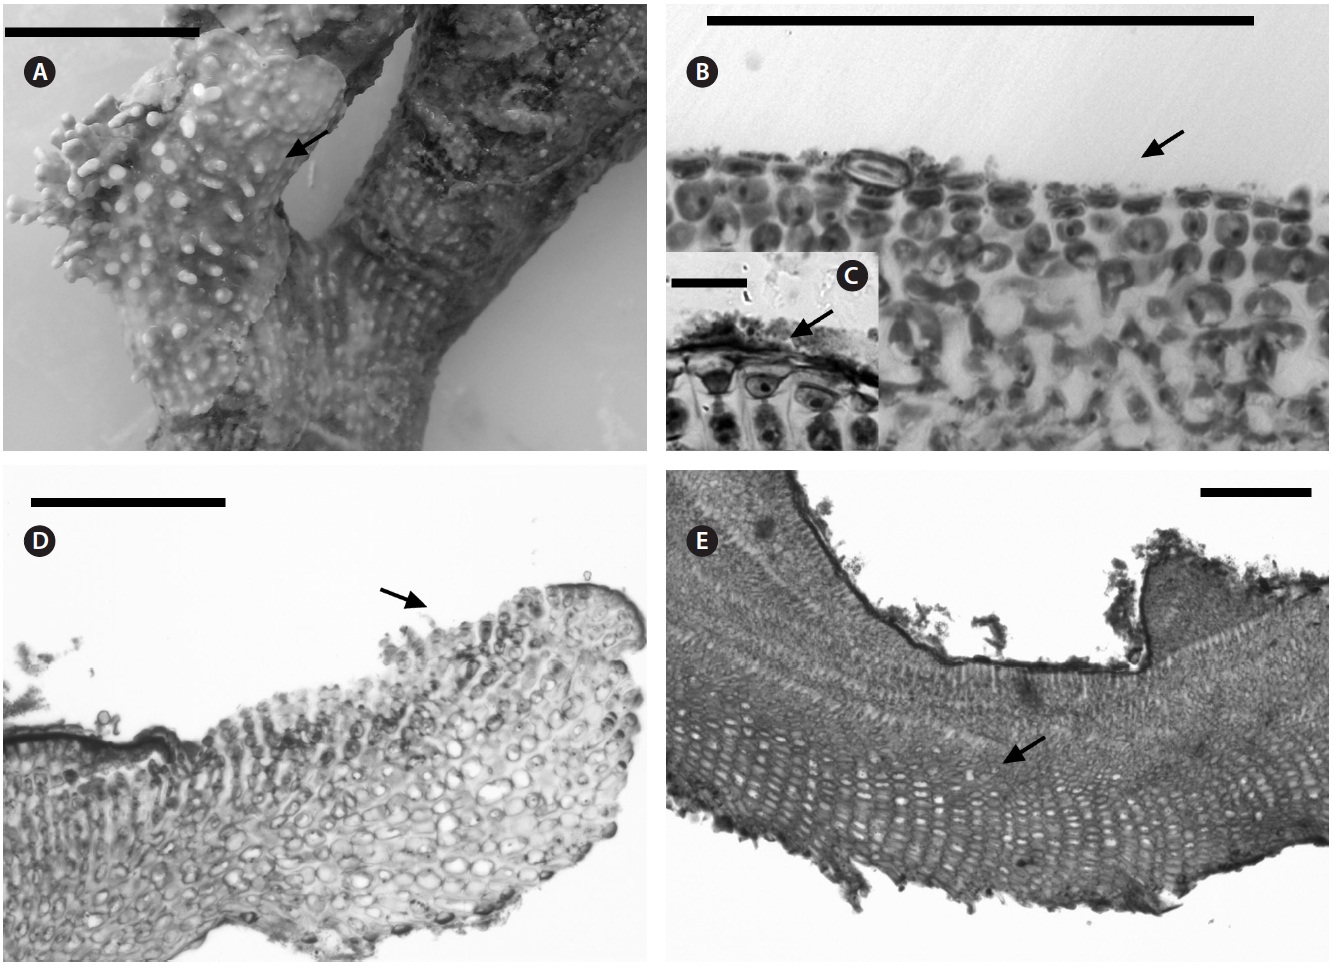 Lithothamnion steneckii. (A) Holotype material of Lithothamnion steneckii sp. nov. (arrow) found on the skeleton of the coral Mussismilia hartii. (B) Transversal section showing flared epithaliall cells (arrow) and cell fusions. (C) Close up of the flared epithelial cells (arrow) and cell fusions. (D) Longitudinal section showing the edge or the plant and monomerous arrangement (arrow). (E) Longitudinal section showing the middle area of the plant and monomerous arrangement. Scale bars represent: A, 1 cm; B, D & E, 100 μm; C, 16 μm.